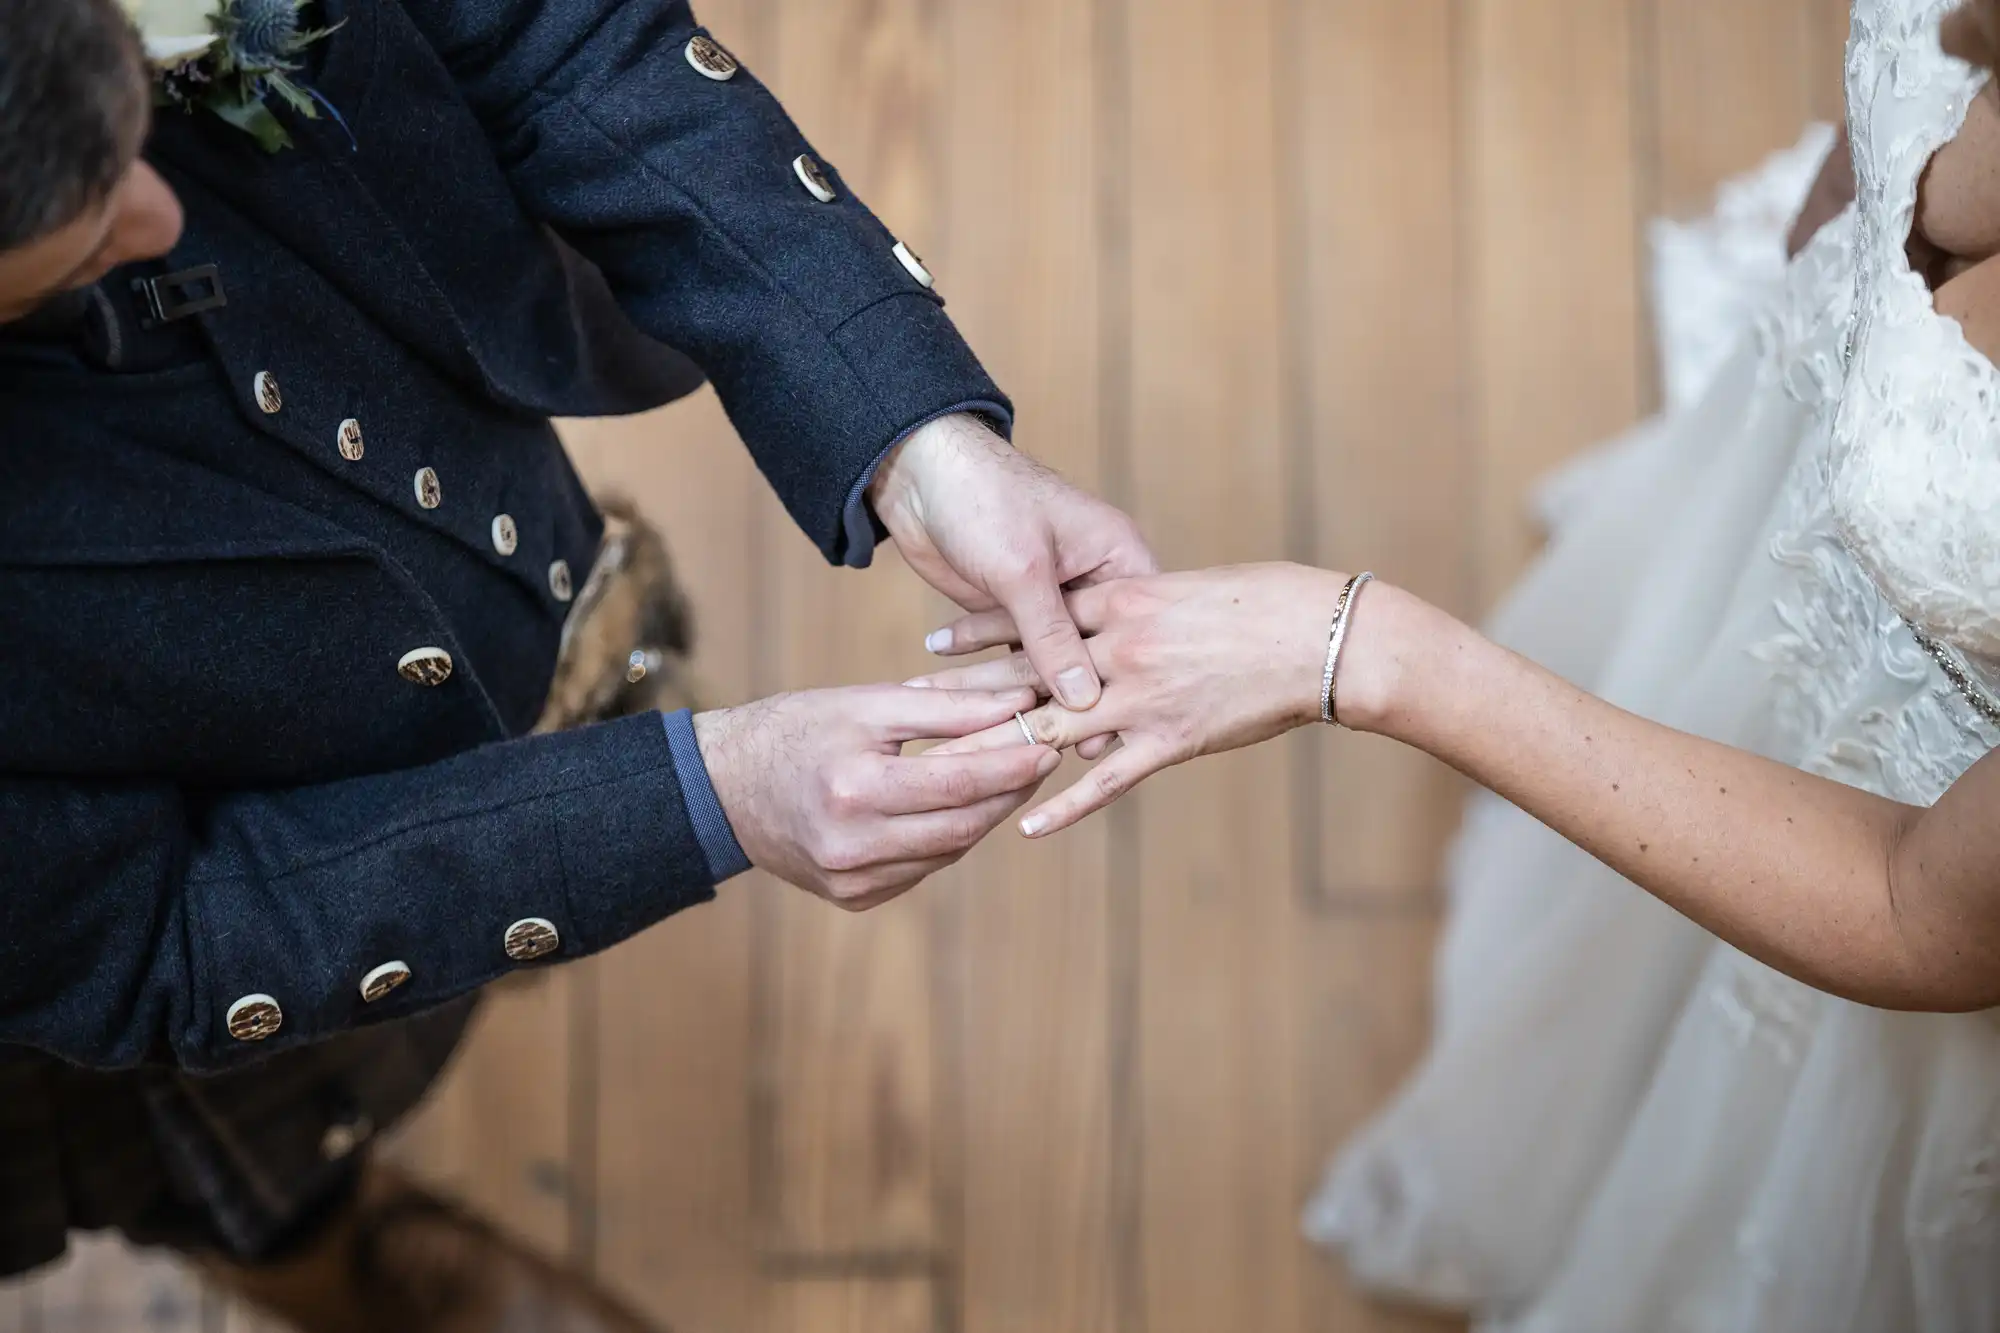 Close-up of a couple exchanging rings during a wedding ceremony. The bride is wearing a white dress, and the groom is in a dark suit with gold buttons. The focus is on their hands and the wedding rings.